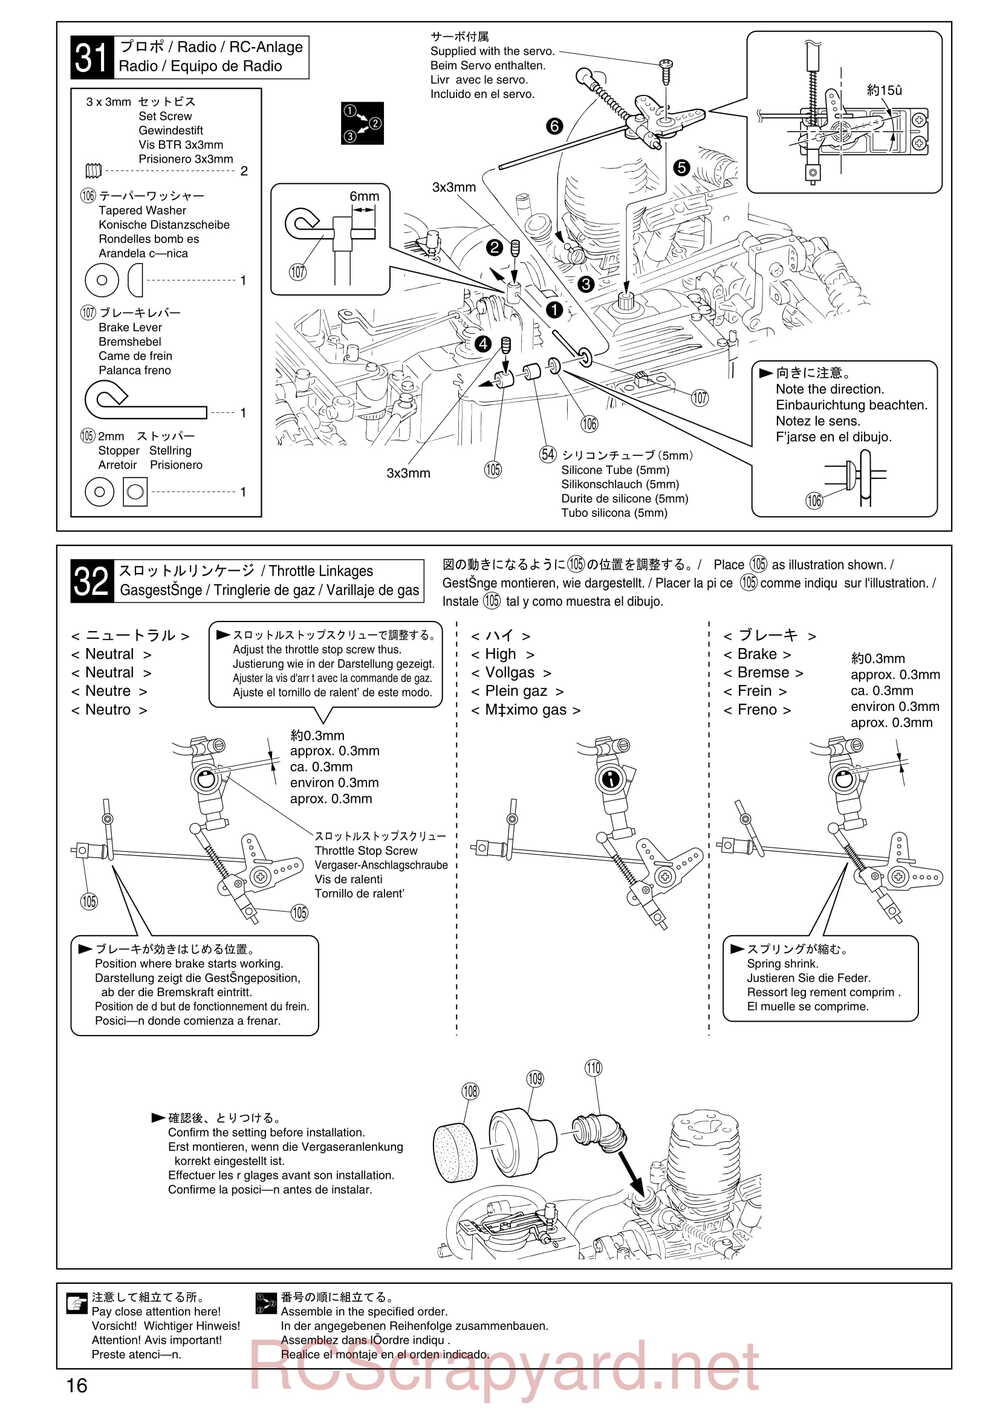 Kyosho - 31095 - TR-15 Stadium-Force - Manual - Page 16